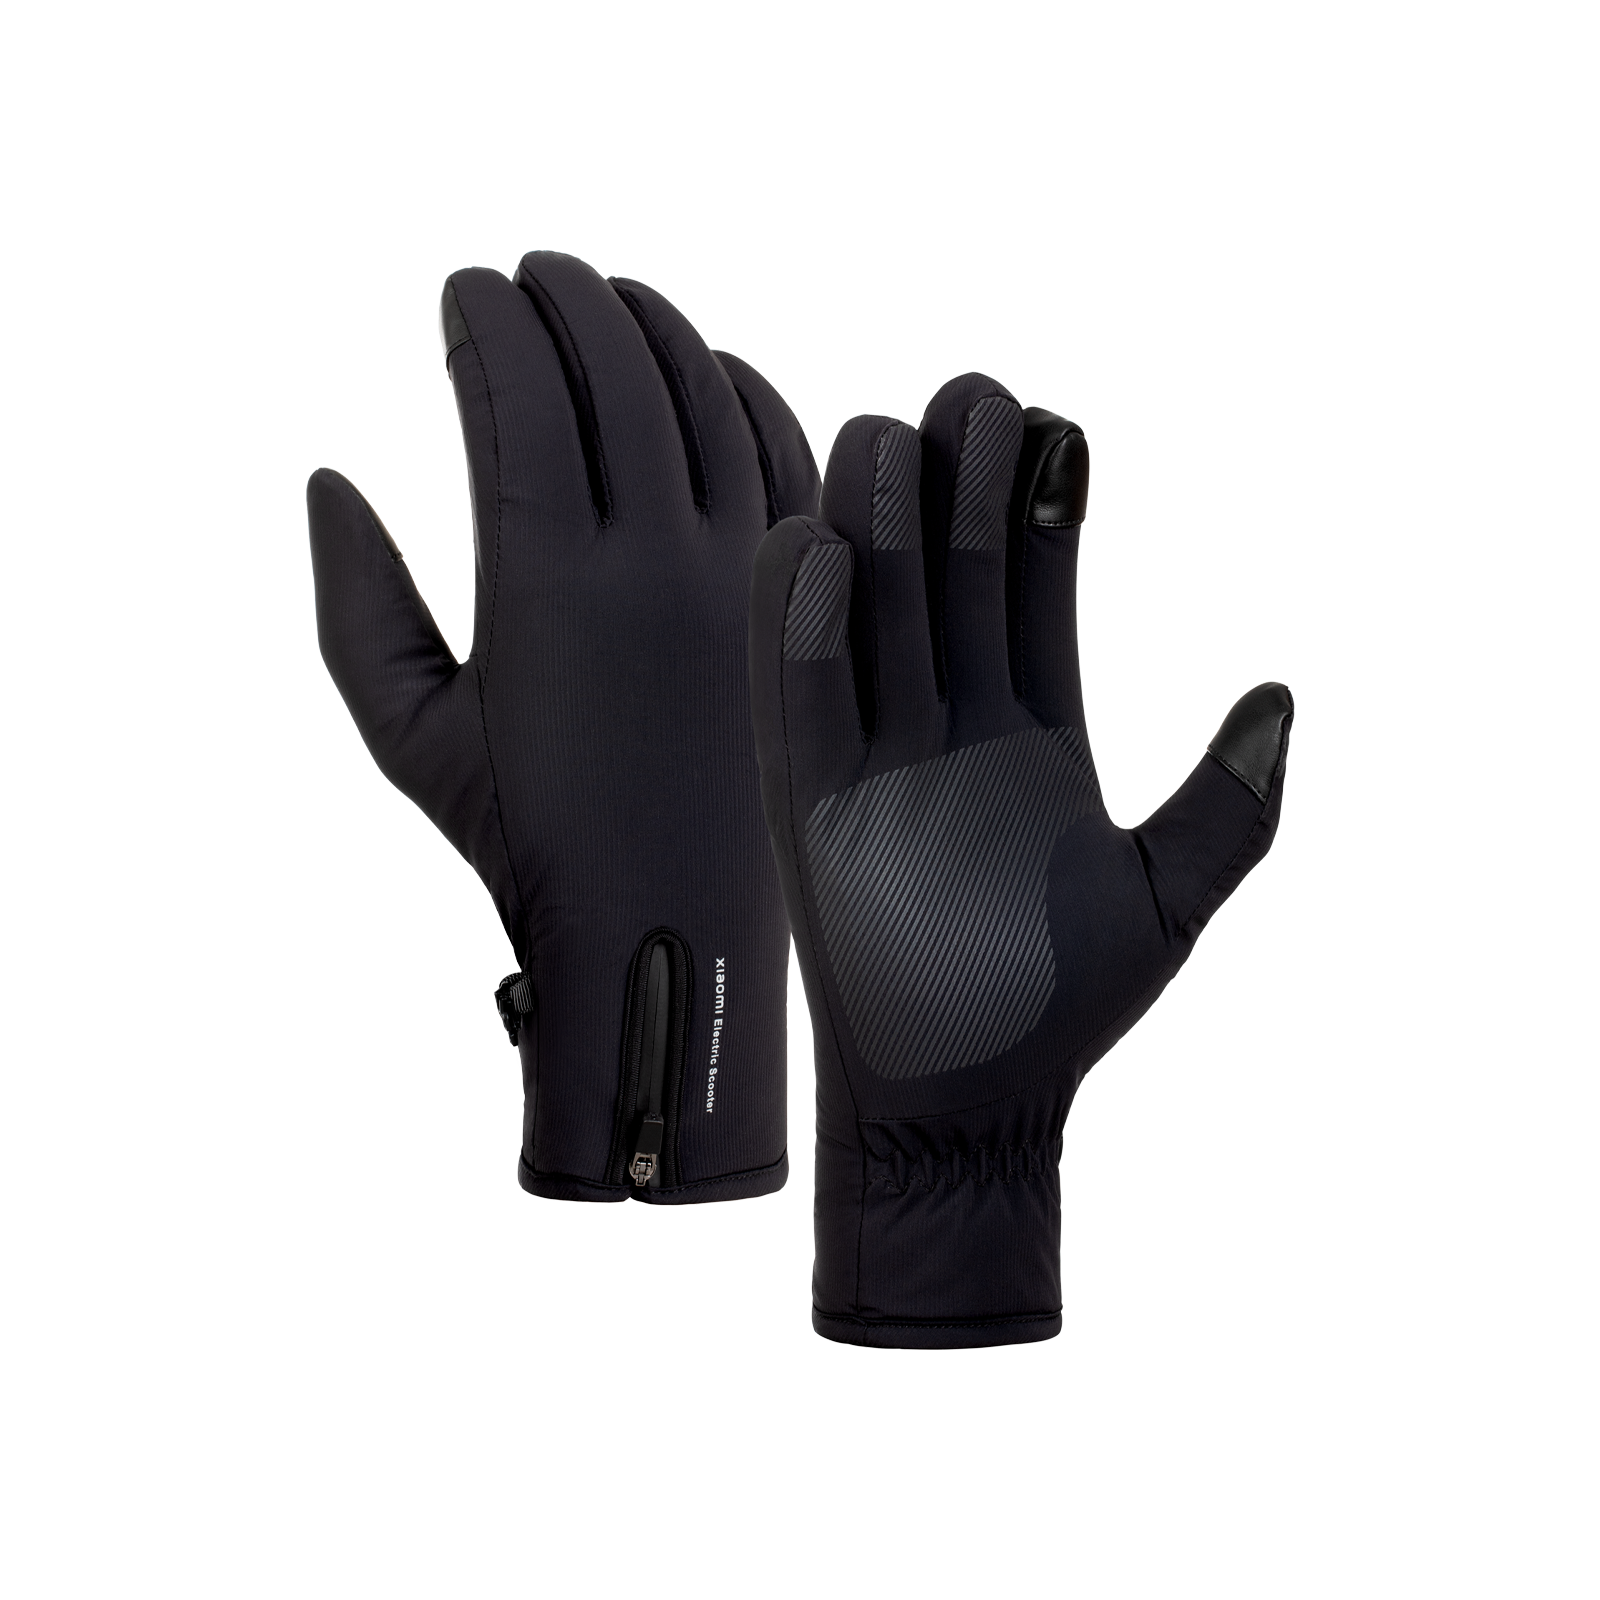 Xiaomi Electric Scooter Riding Gloves XL